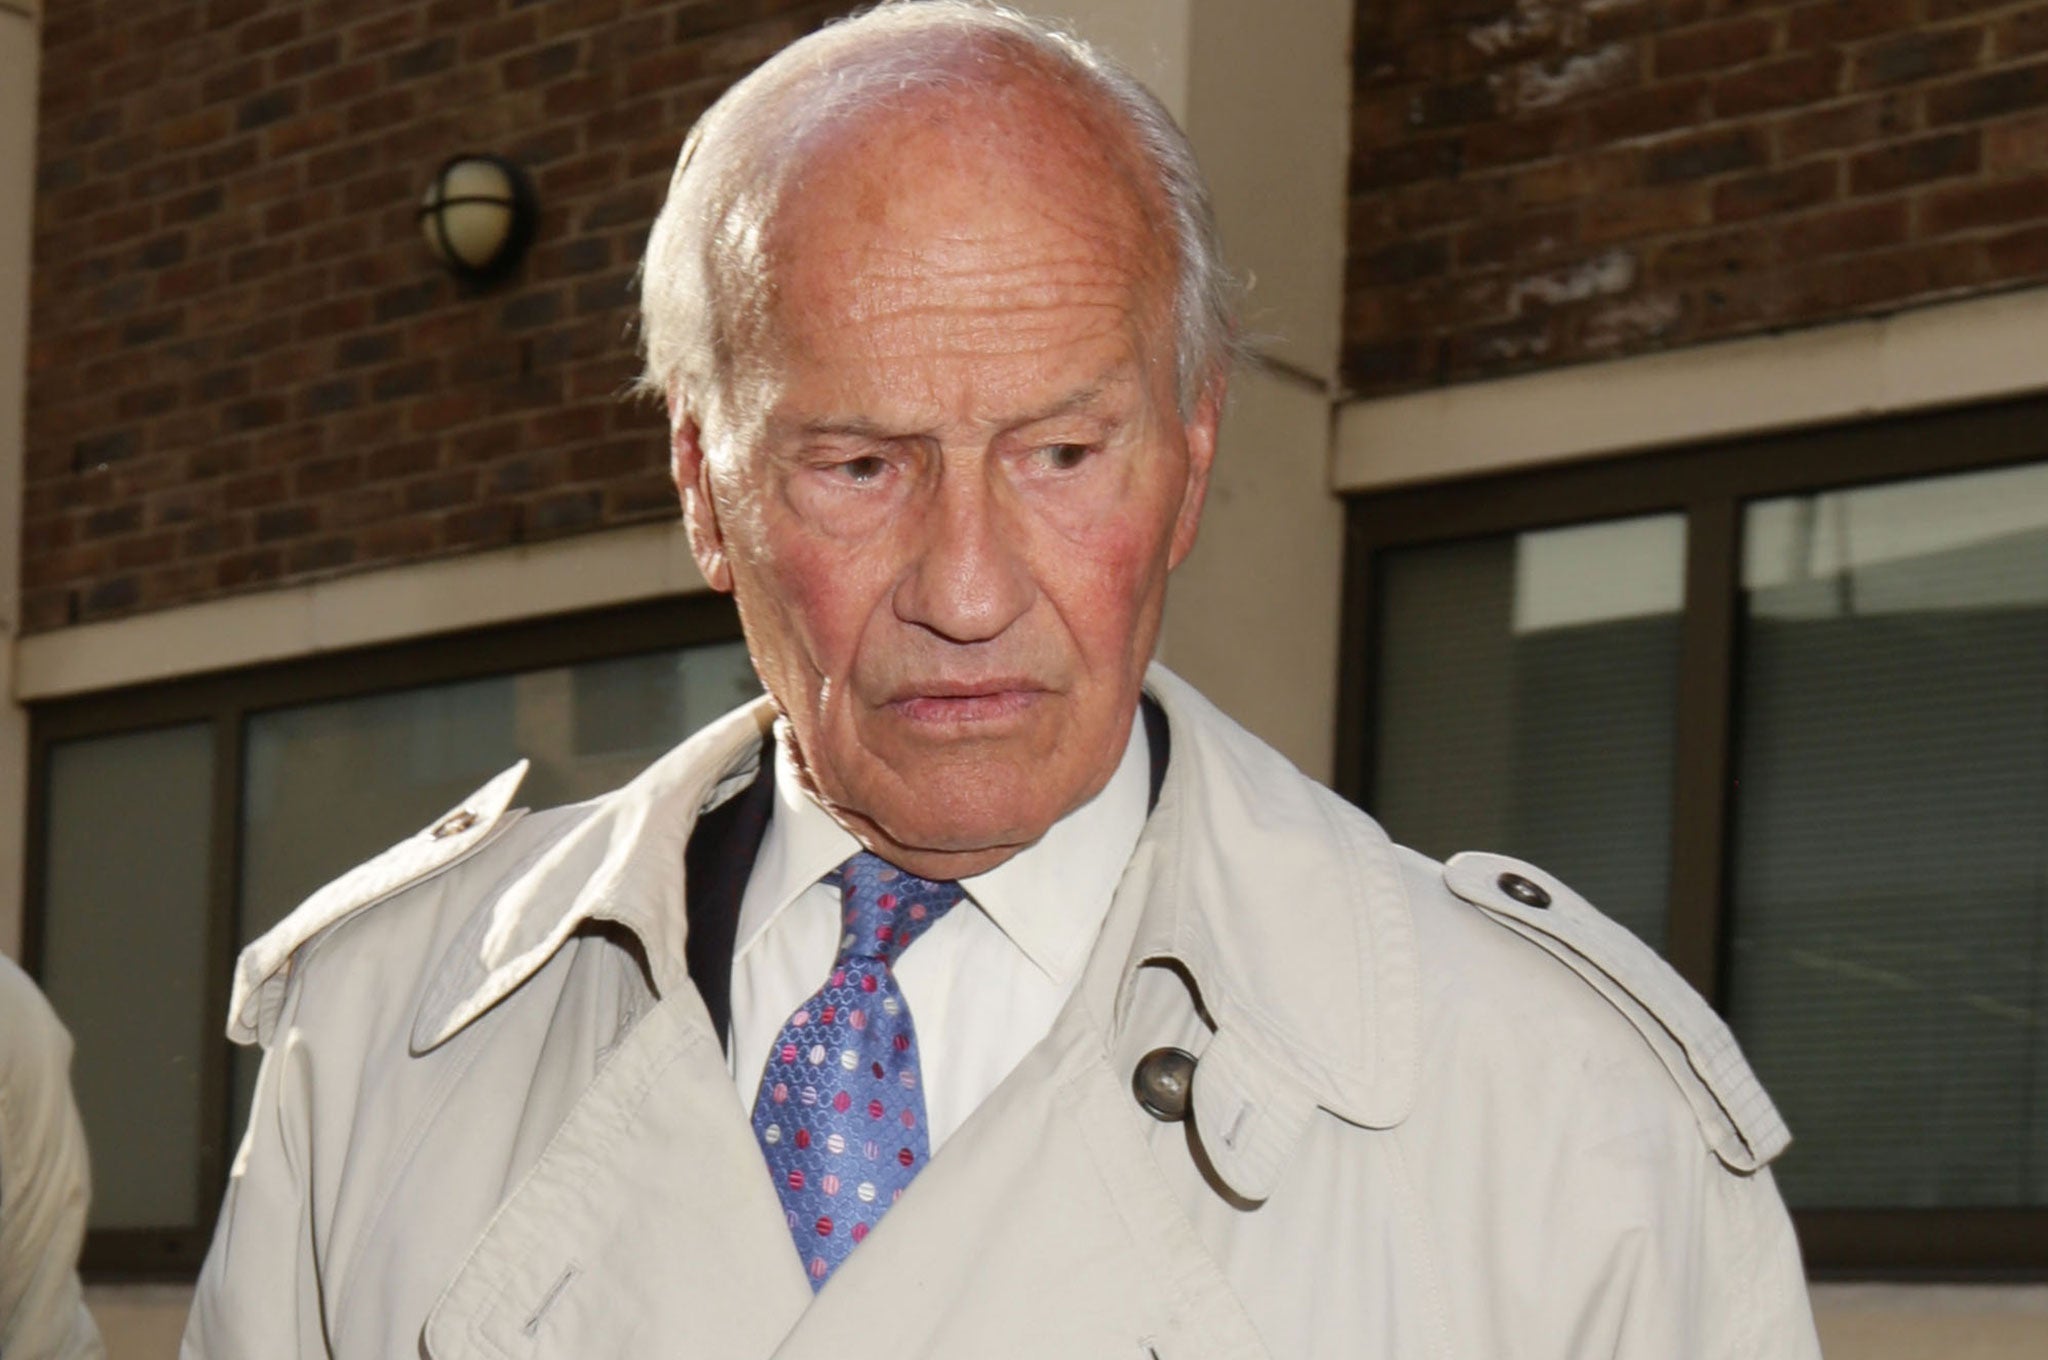 Former aide to the Duke of Edinburgh Benjamin Herman leaving Blackfriars Crown Court in London, where he is accused of abusing a girl, who was aged around 12, in the early 1970s